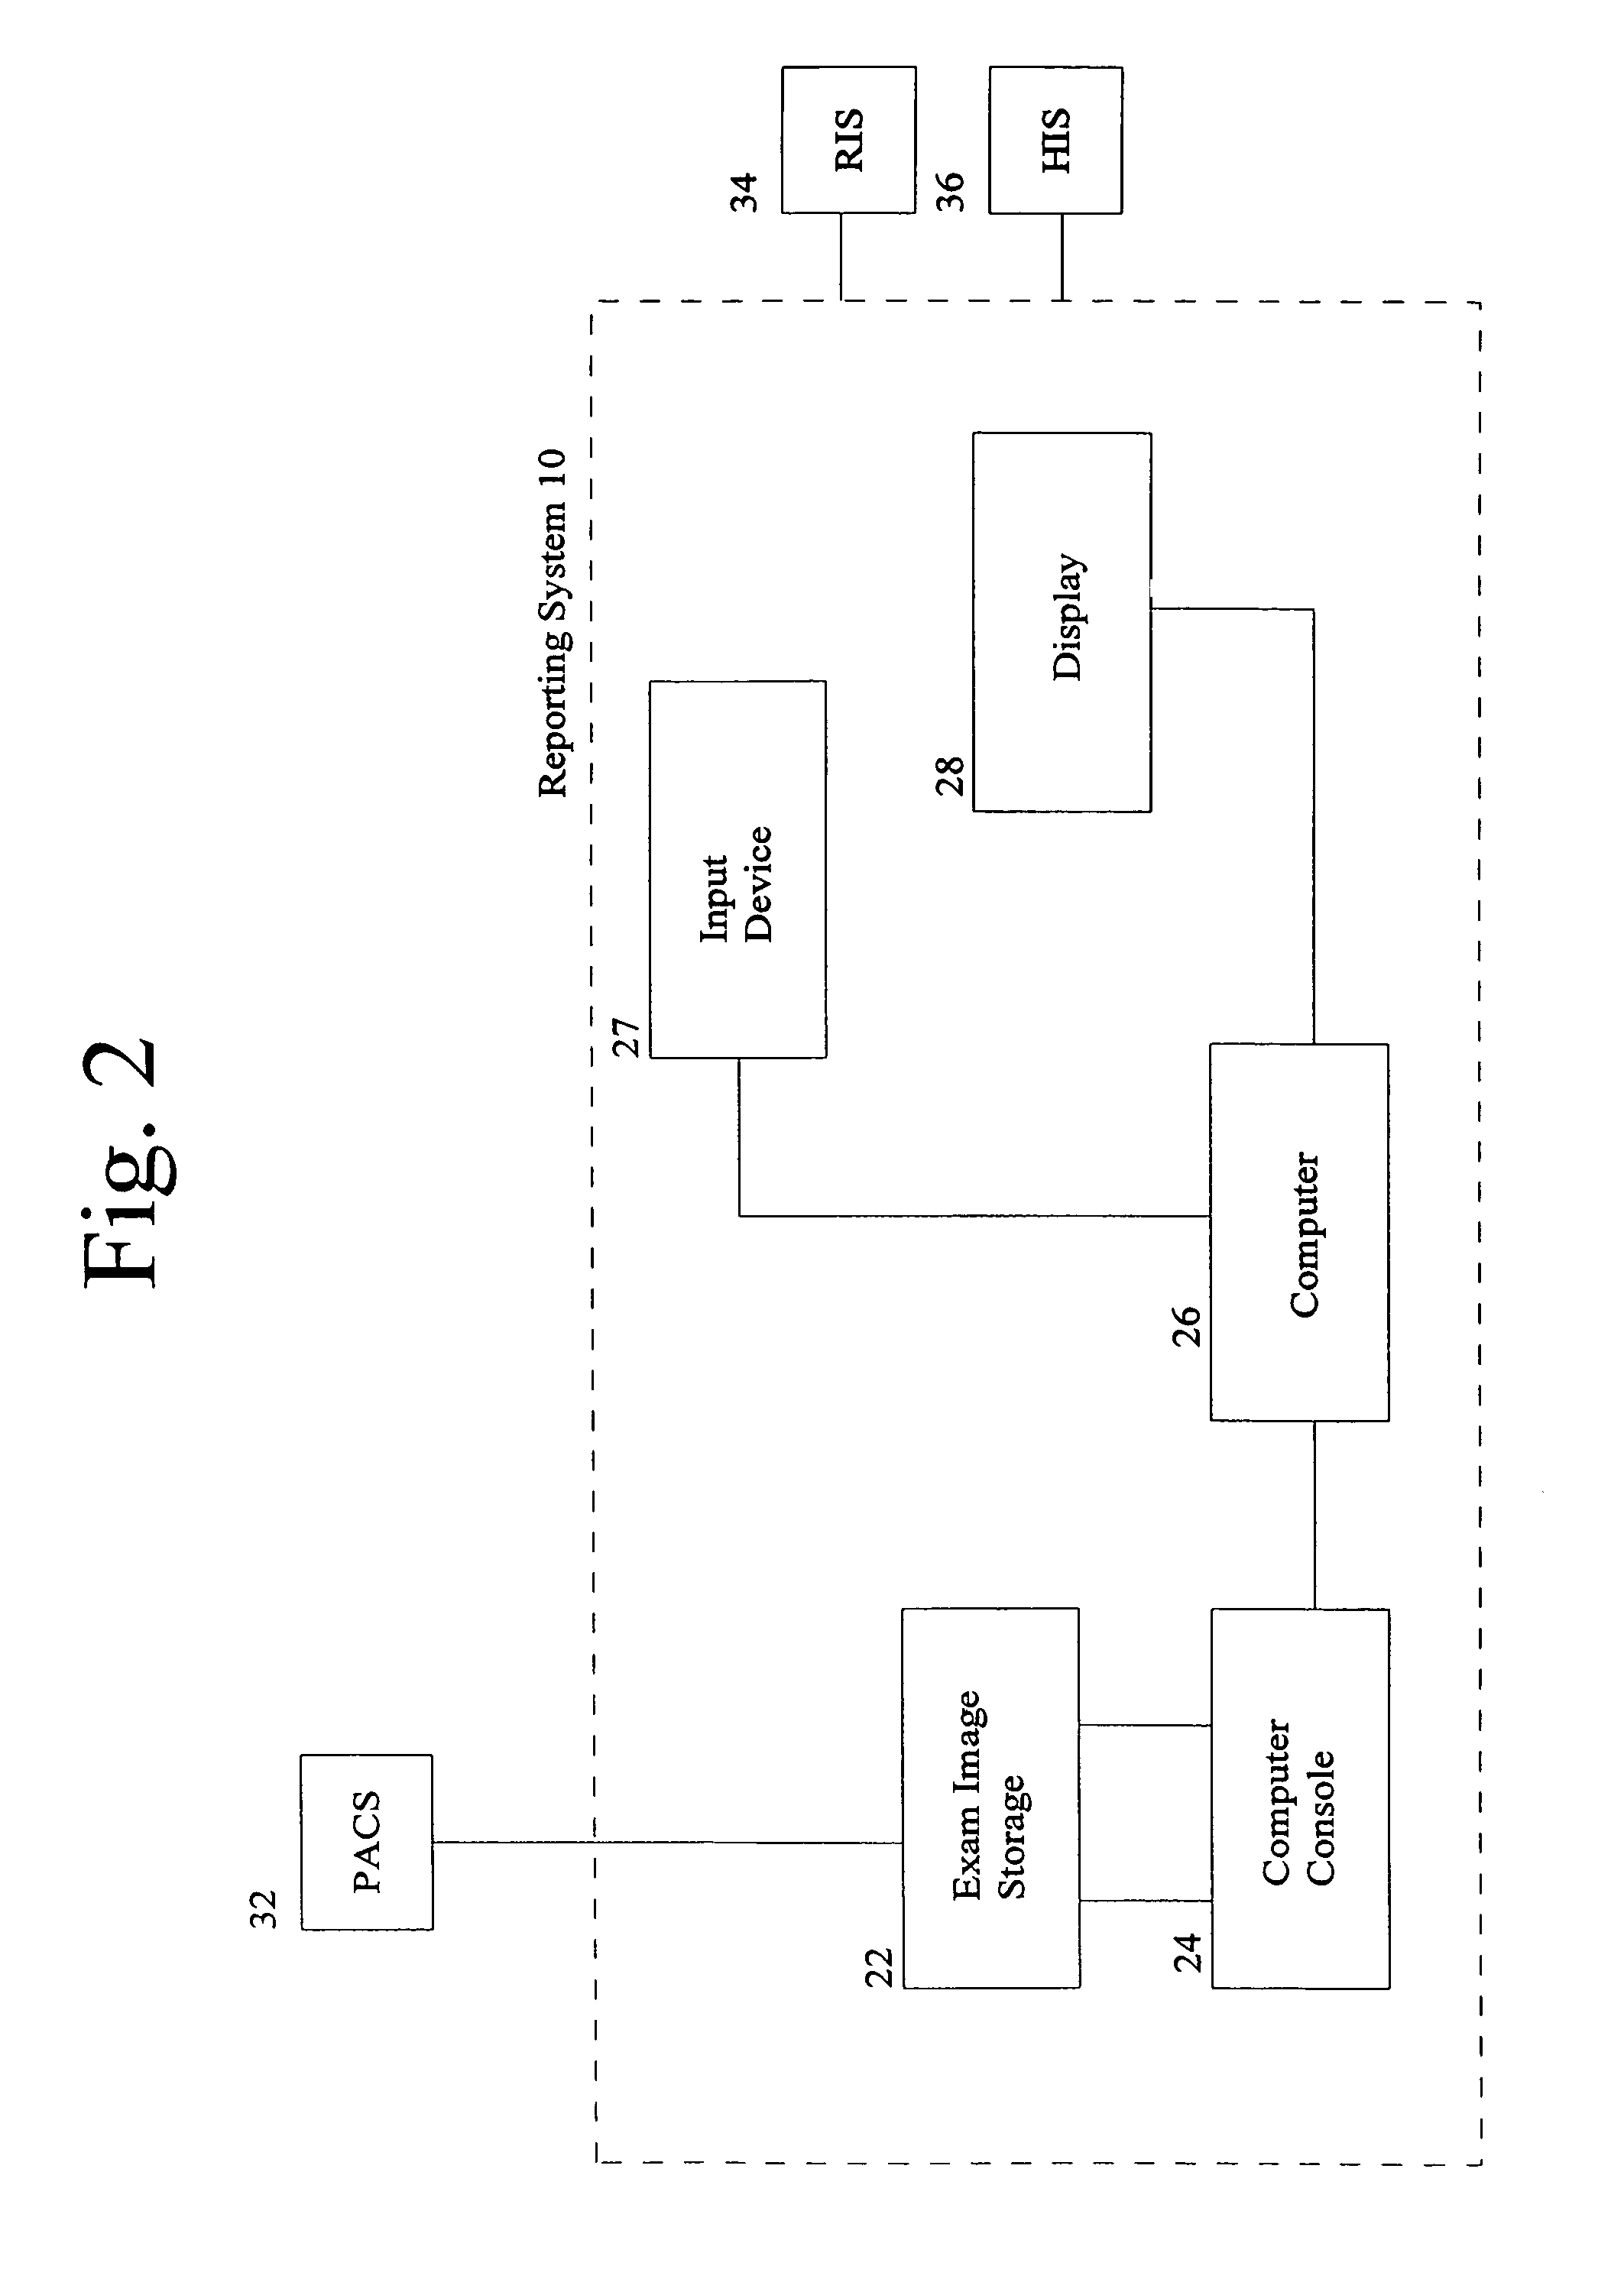 Image reporting method and system